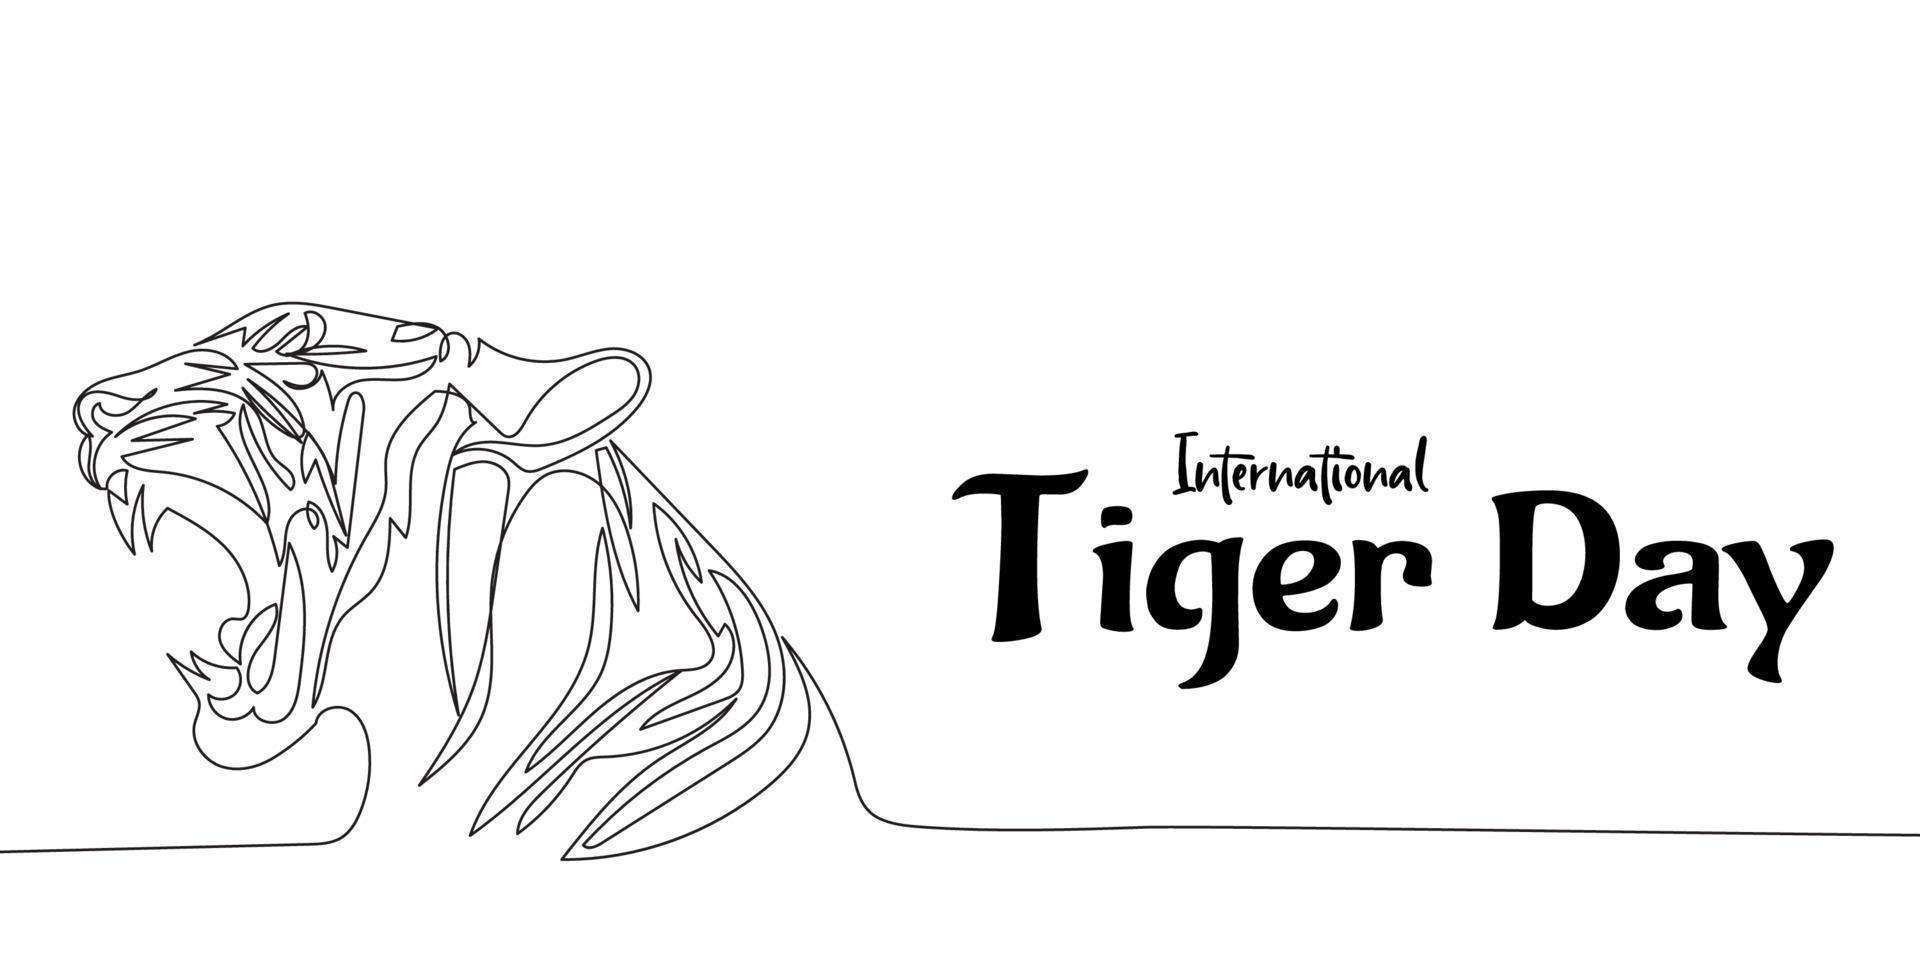 International tiger day awareness for conservation vector